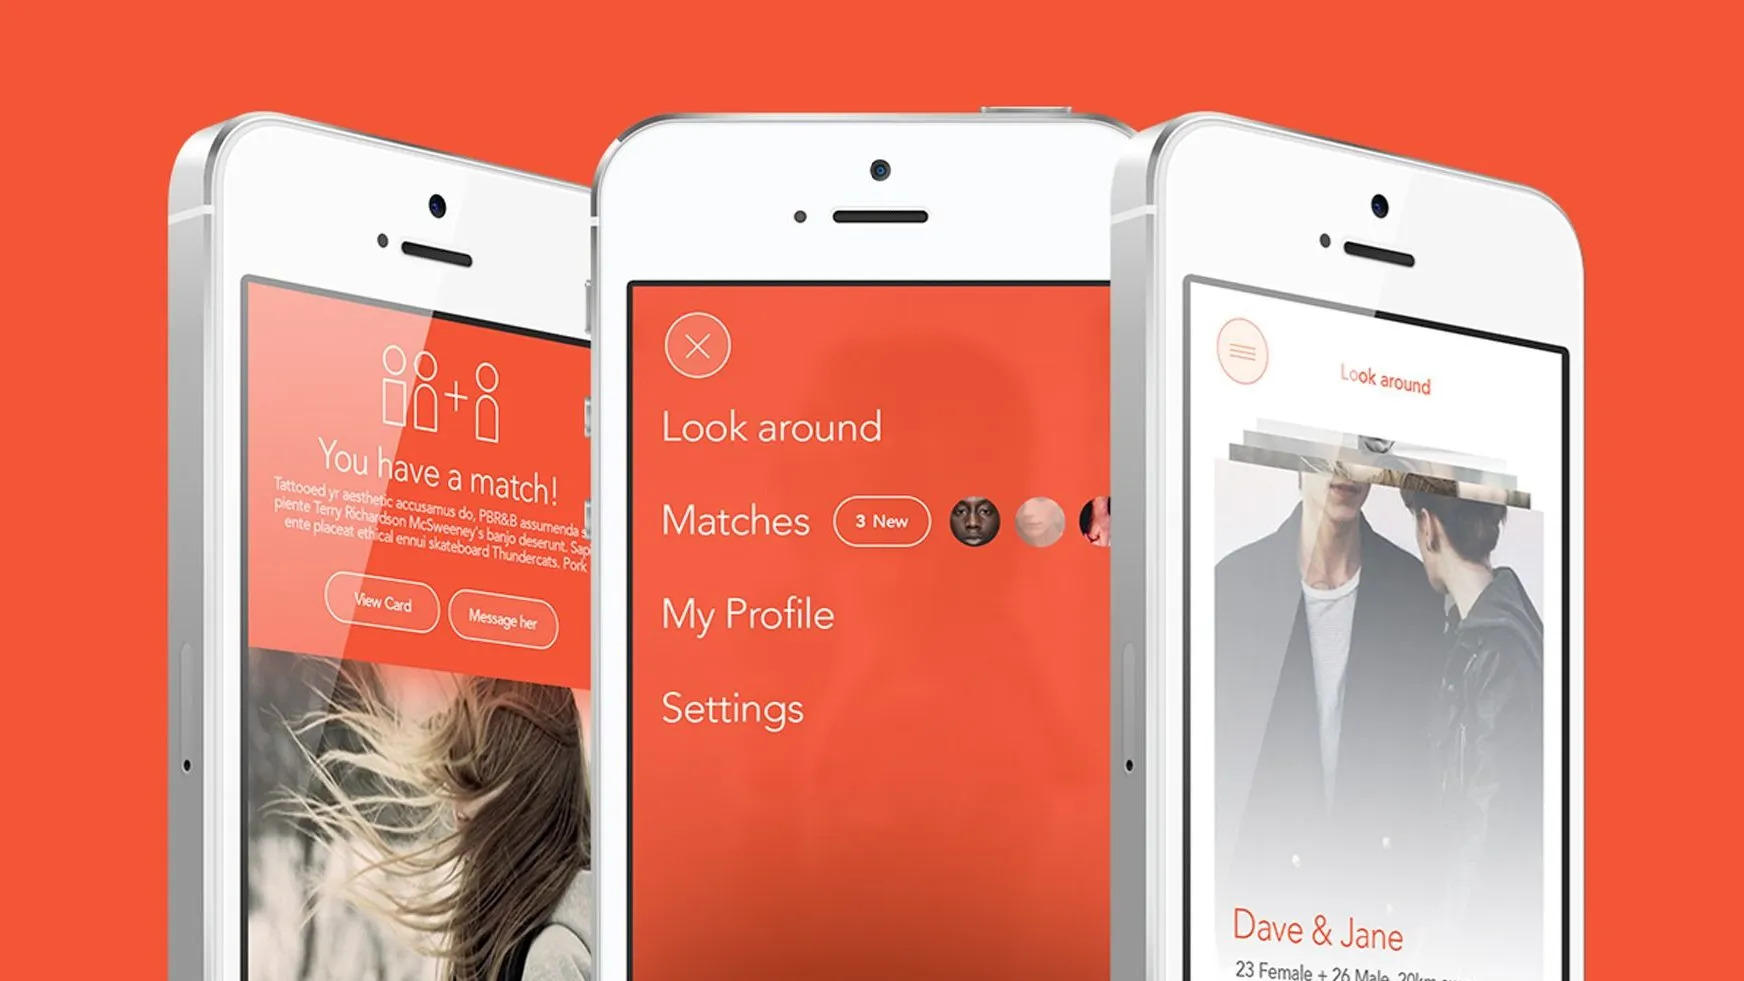 tinder-wants-3nder-tinder-for-threesomes-to-go-away